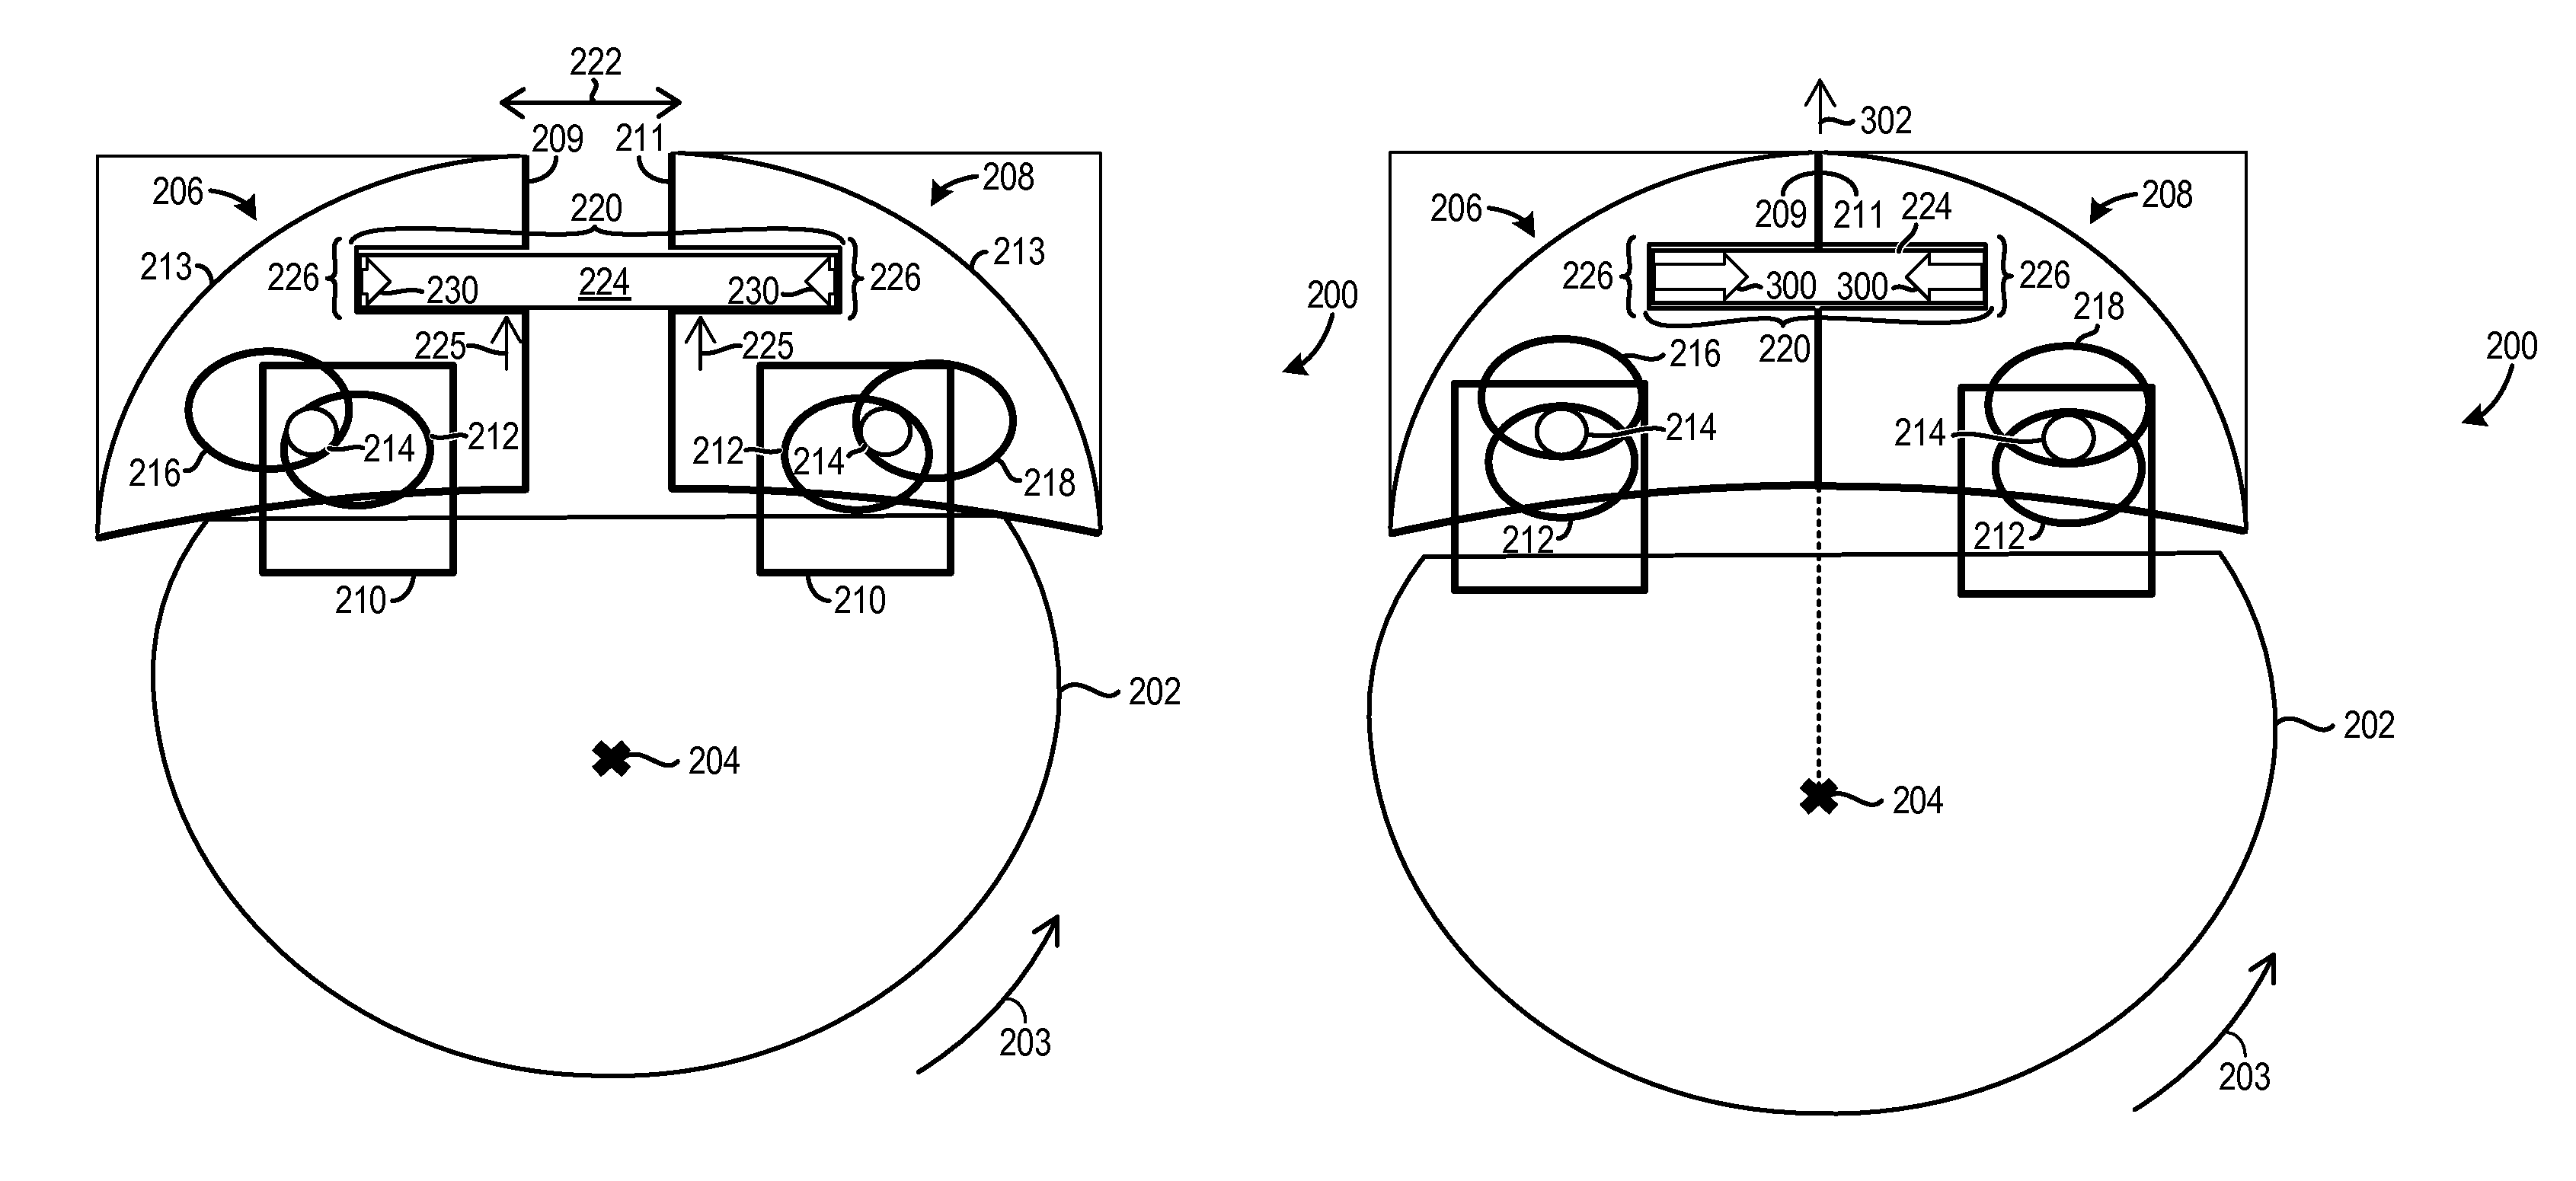 Pendulum absorber with sliding joint